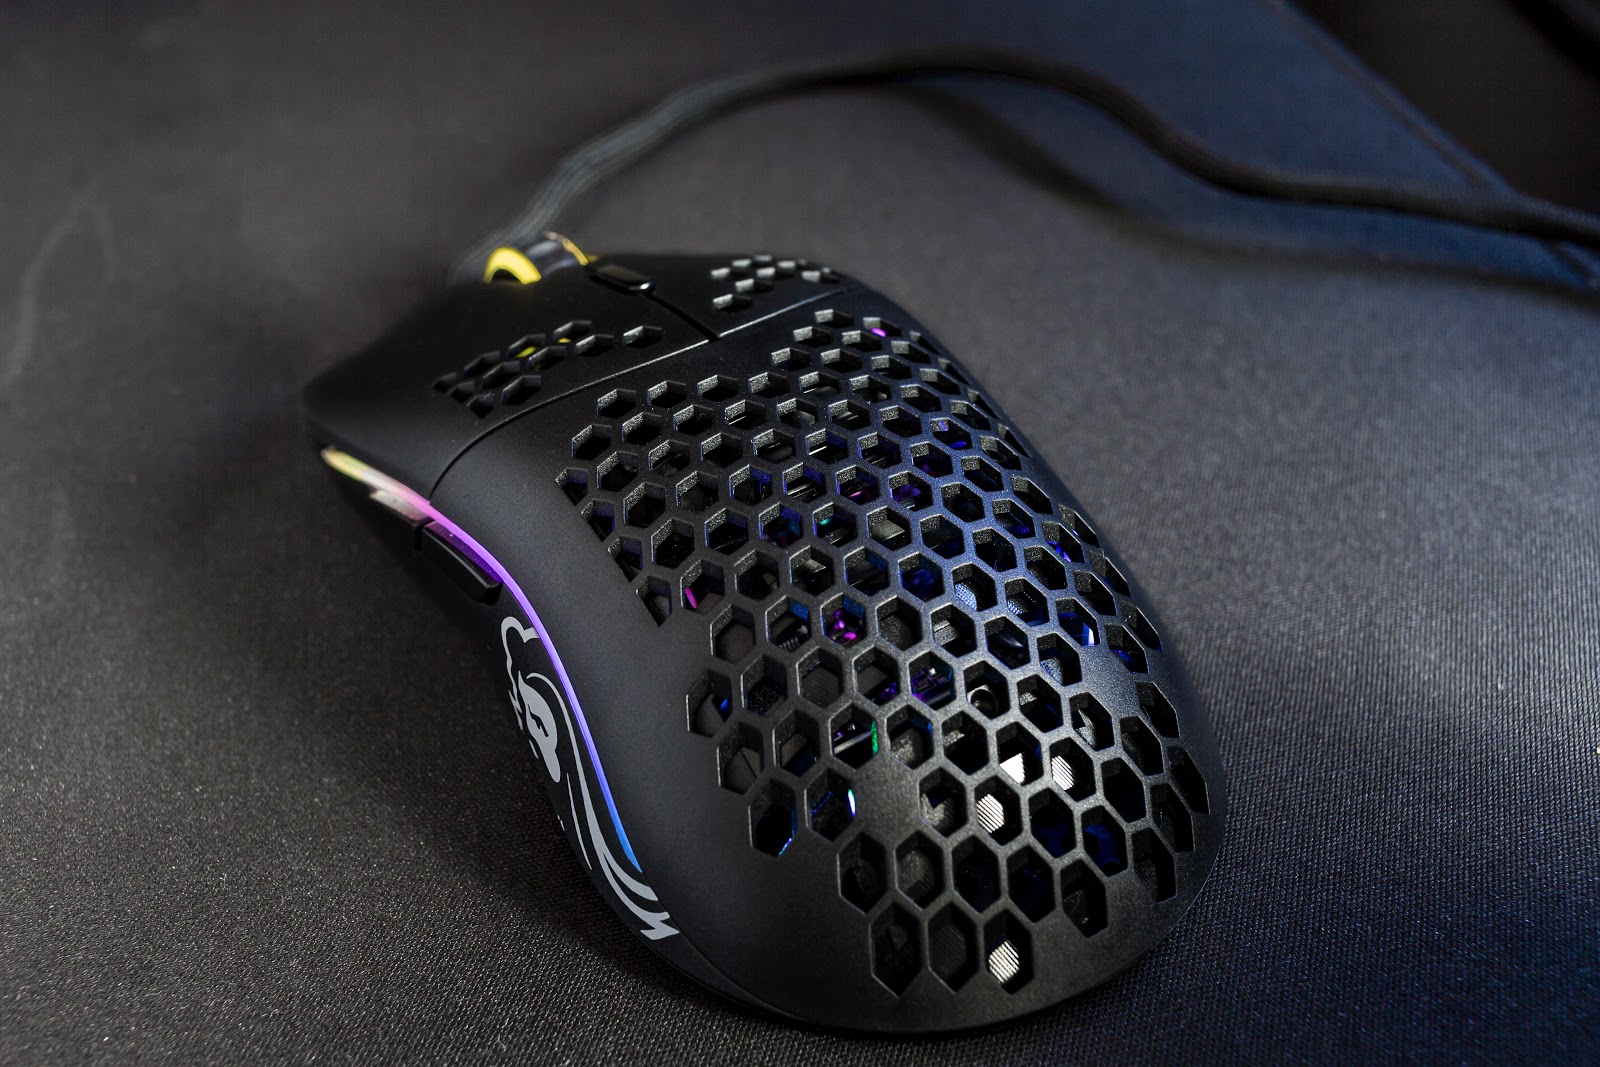 Glorious Model O review: A high-performance mouse that costs less than it  weighs - Dot Esports